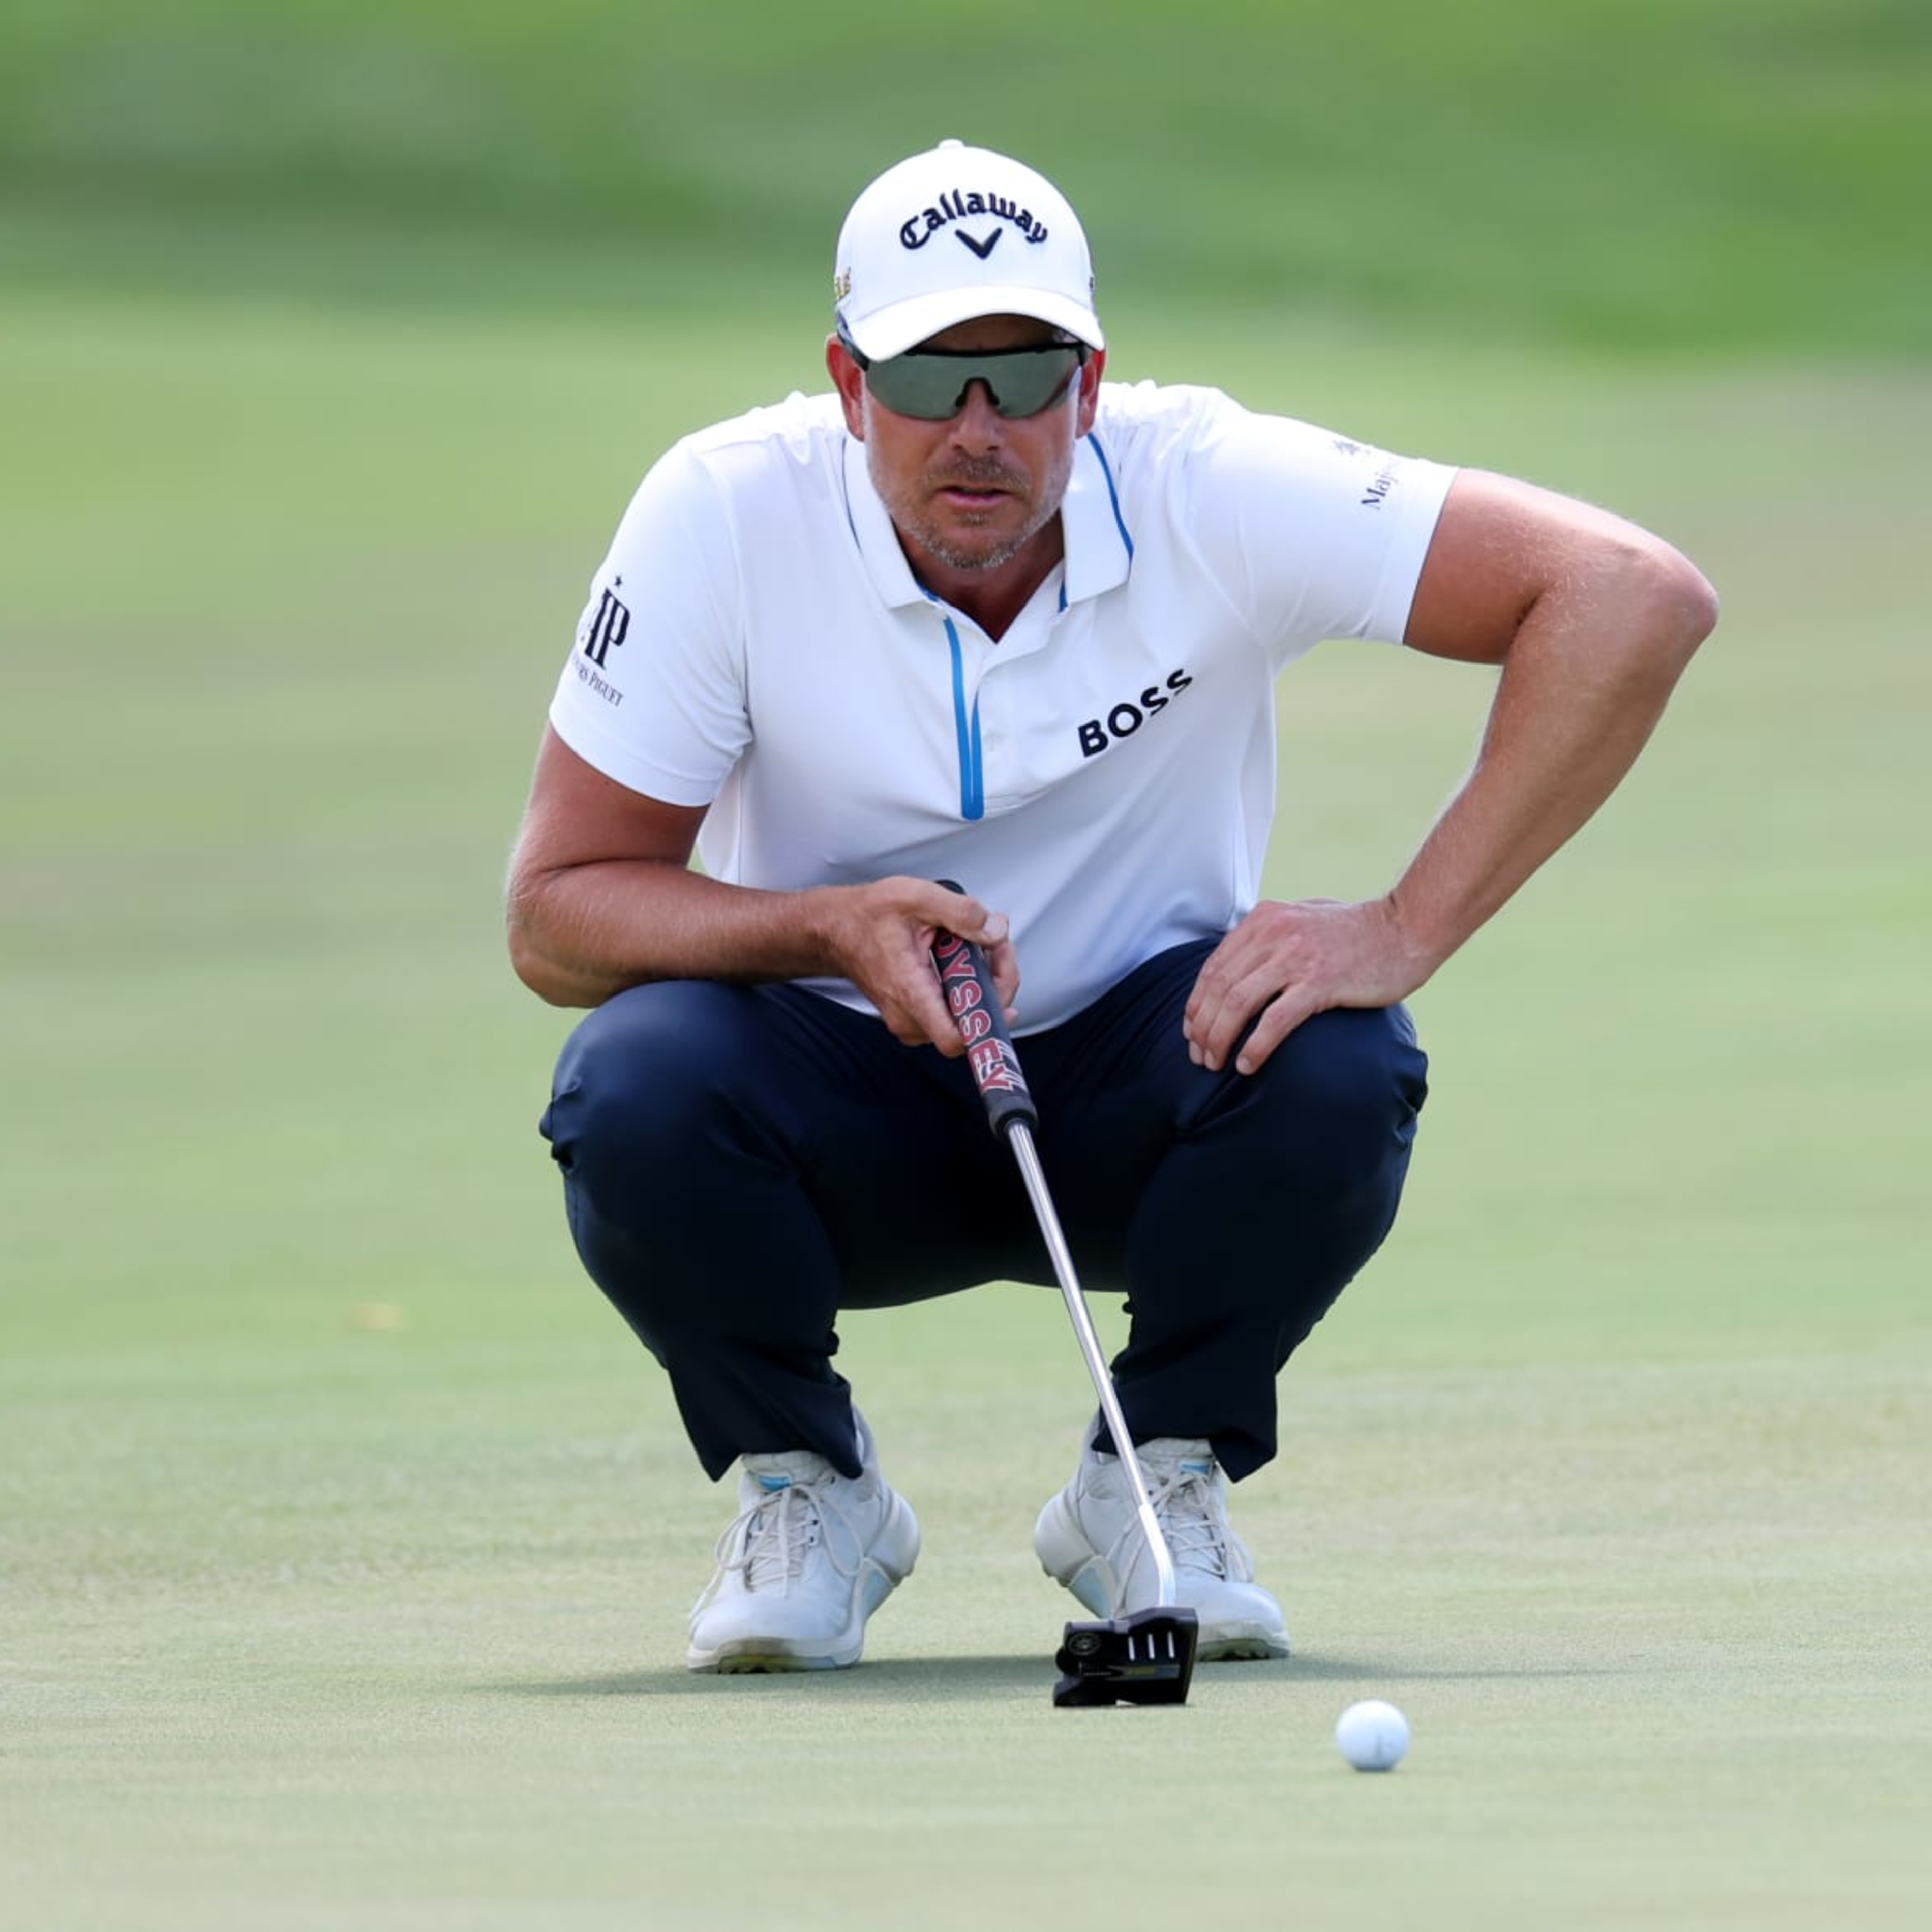 Henrik Stenson Leads LIV Bedminster After Day 2; Phil Mickelson’s Struggles Continue